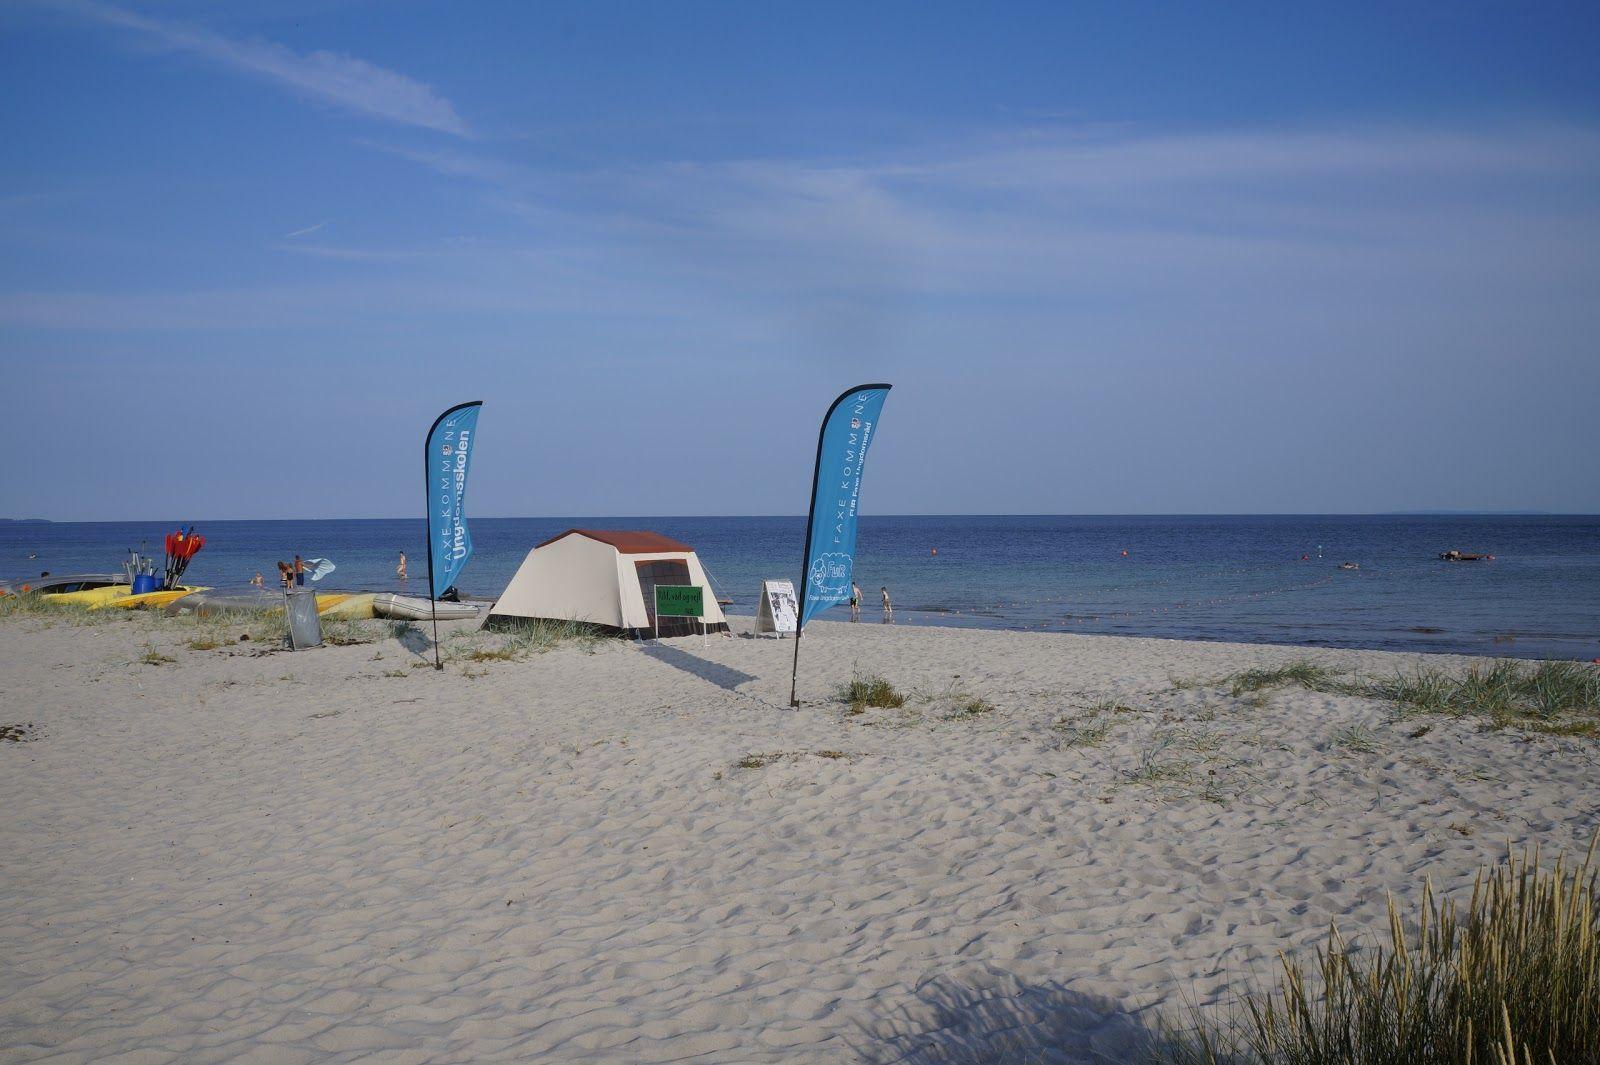 Faxe Ladeplads Camping, Faxe Ladeplads, Denmark